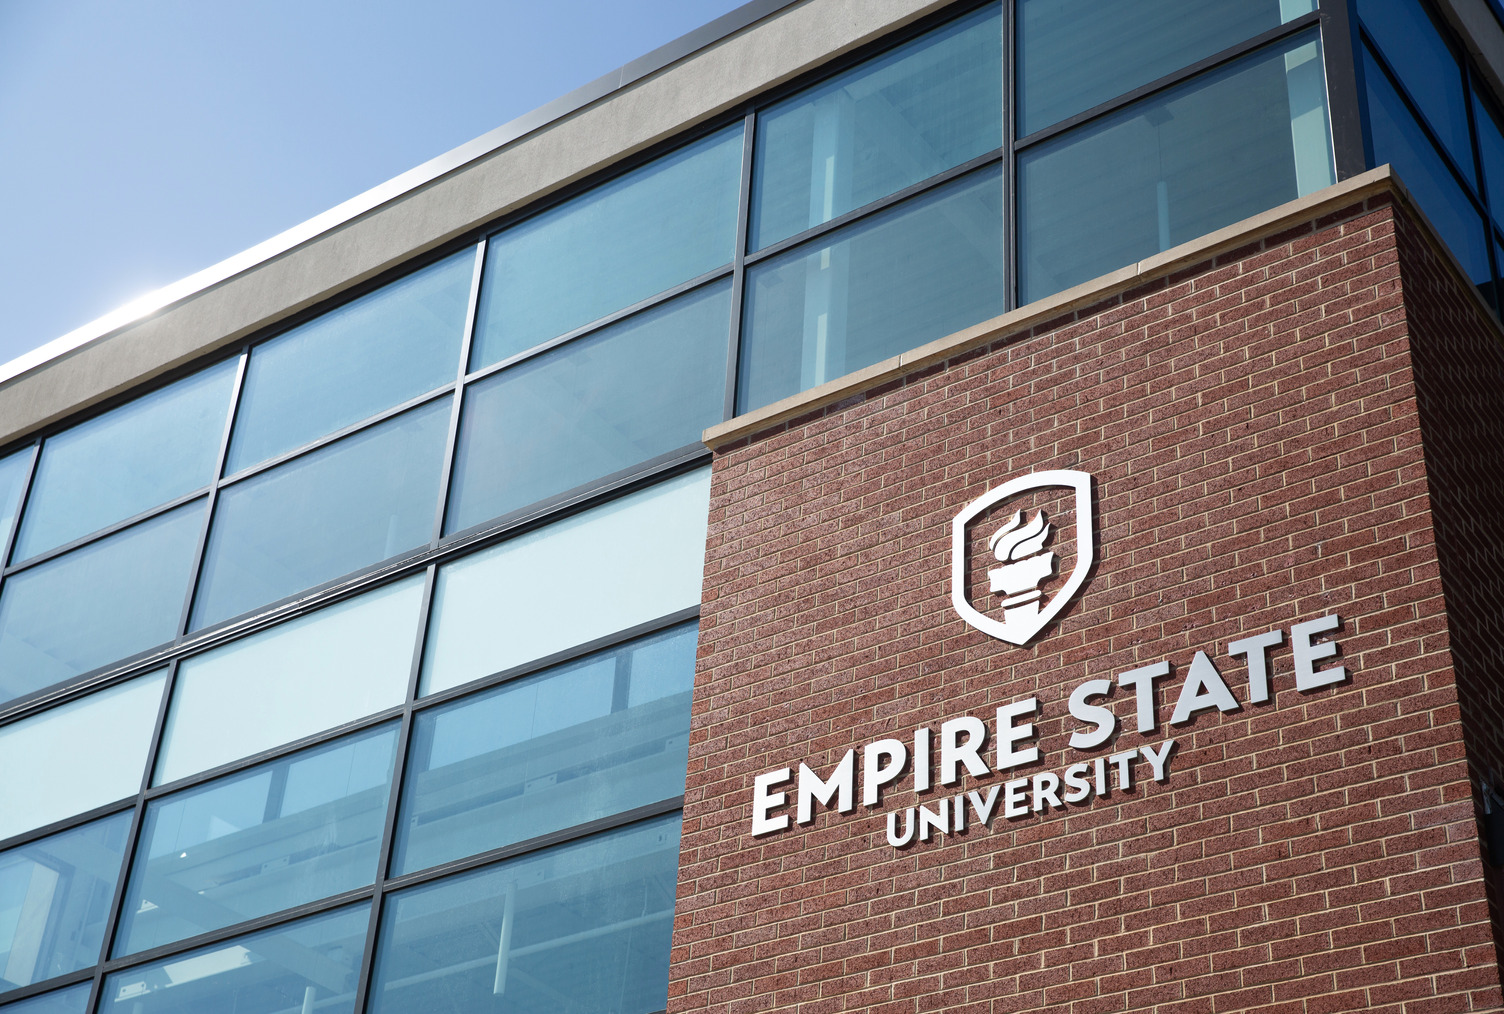 SUNY Empire State College - CLOSED, 680 Westfall Rd, Brighton, Town of, NY,  Services NEC - MapQuest